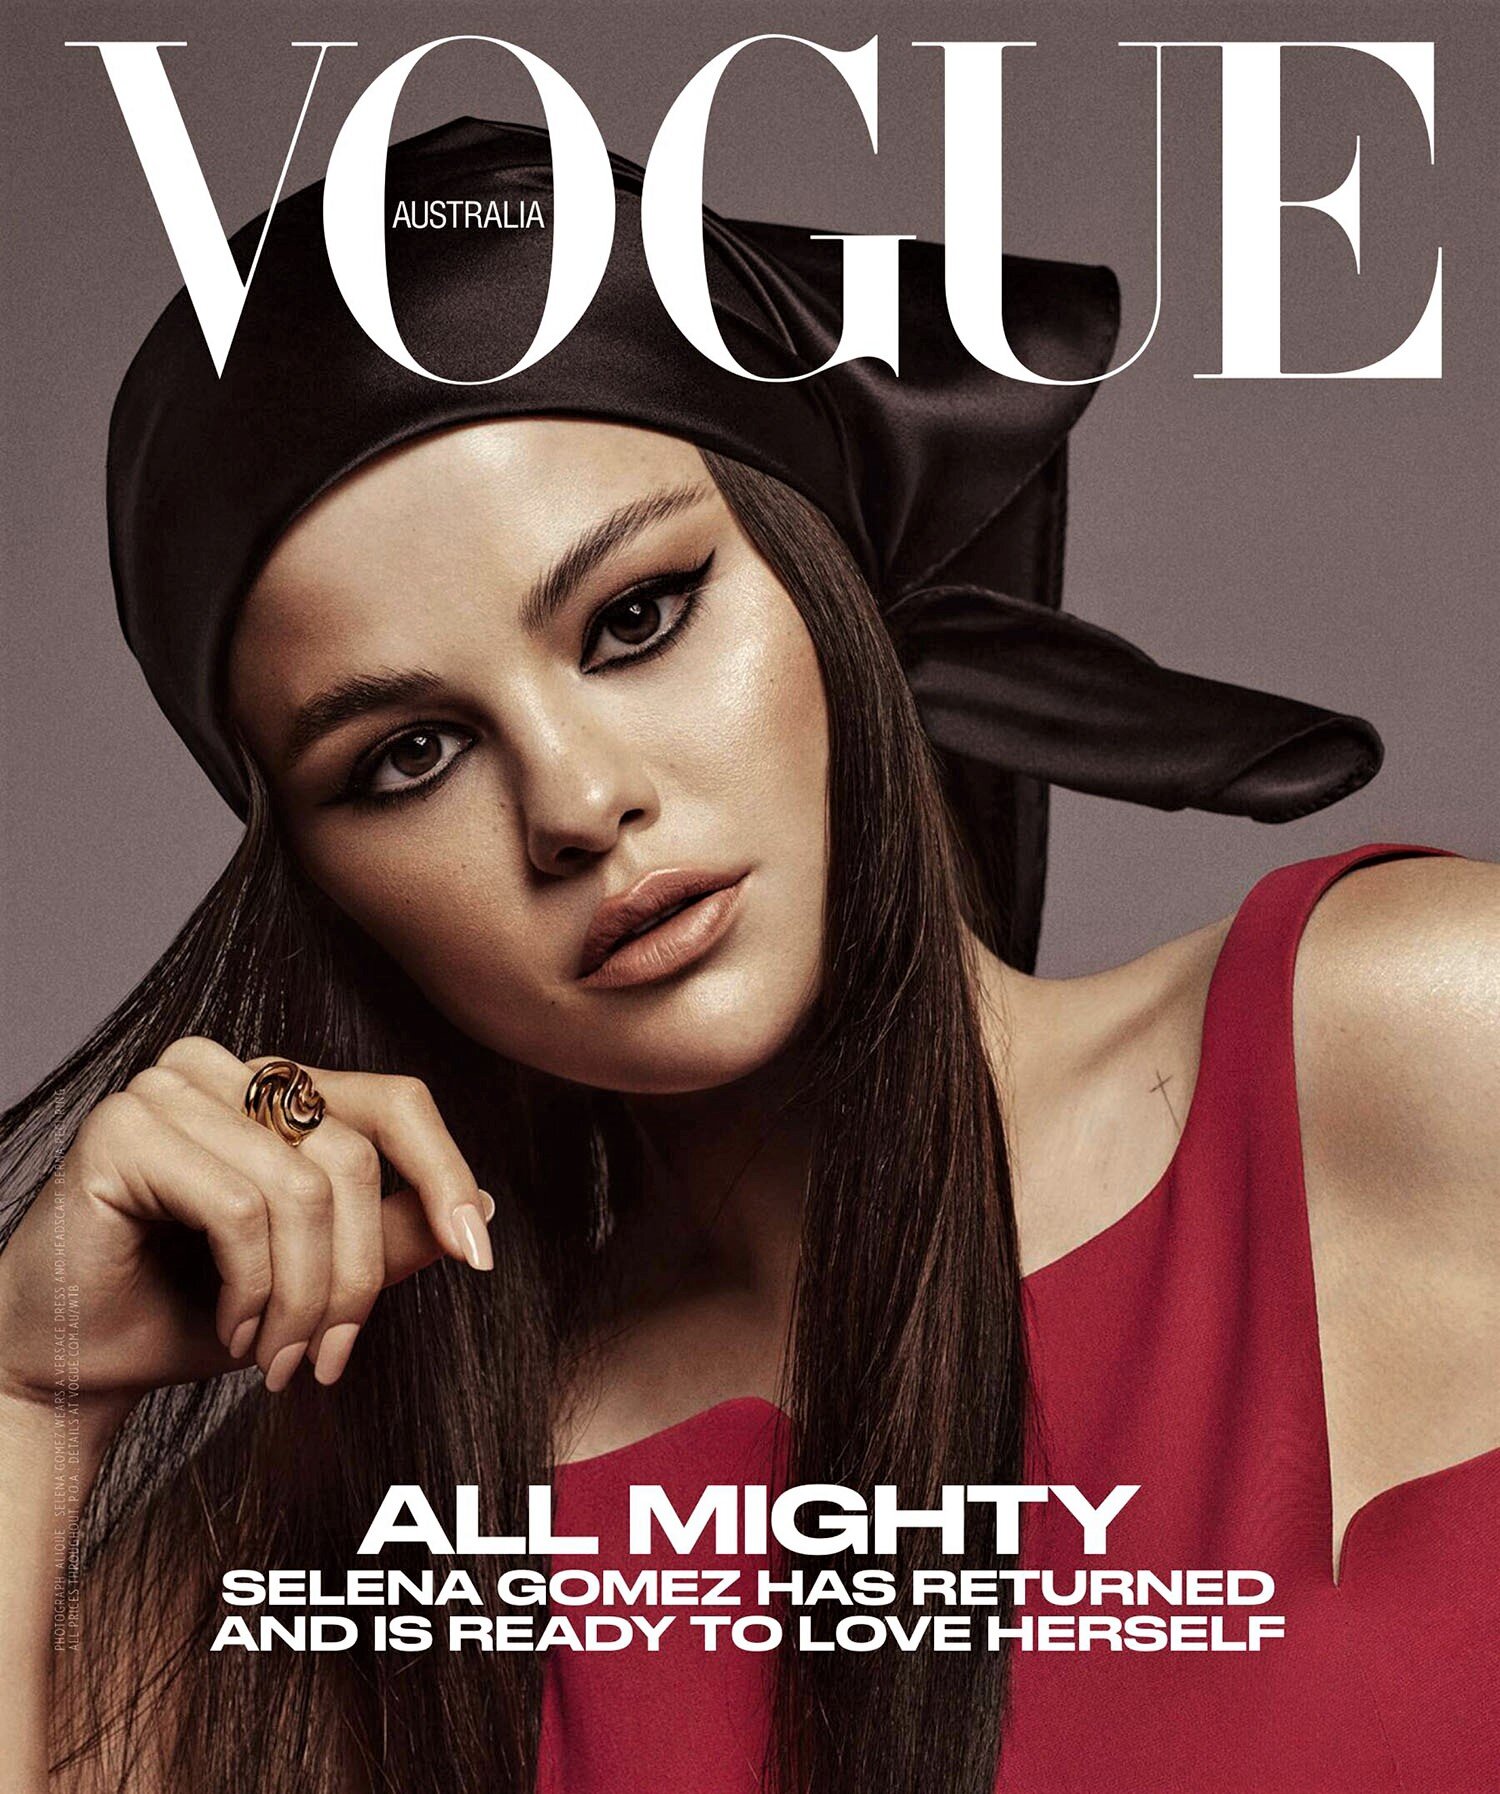 Selena-Gomez-in-Vogue-Australia-July-and-Vogue-Singapore-July-August-by-Alique (4).jpg